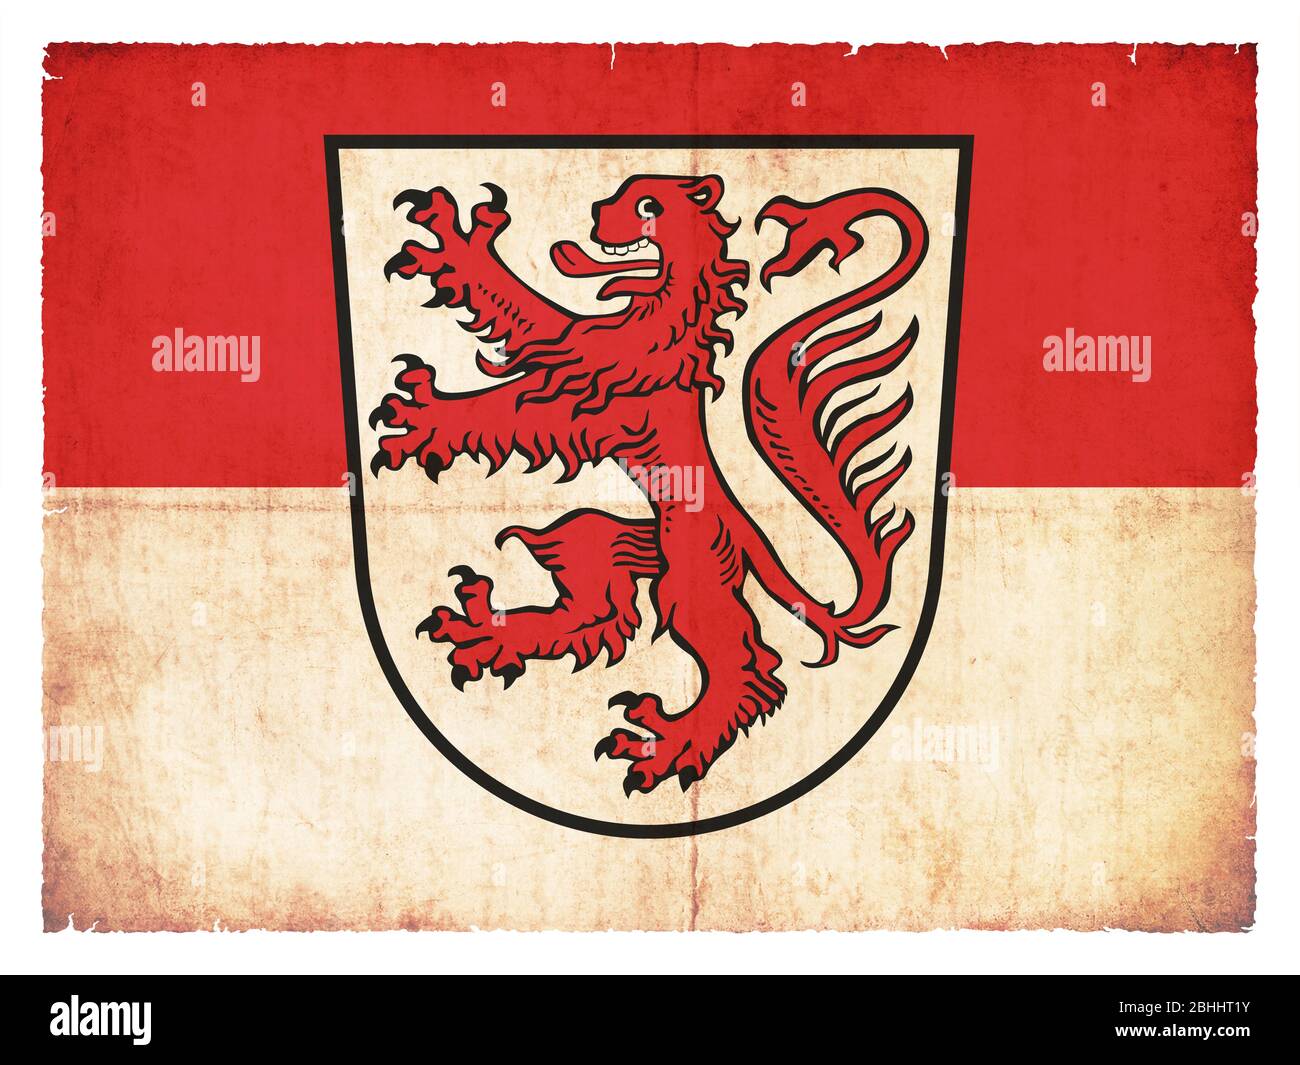 Flag of the German town Braunschweig (Lower Saxony) created in grunge style Stock Photo